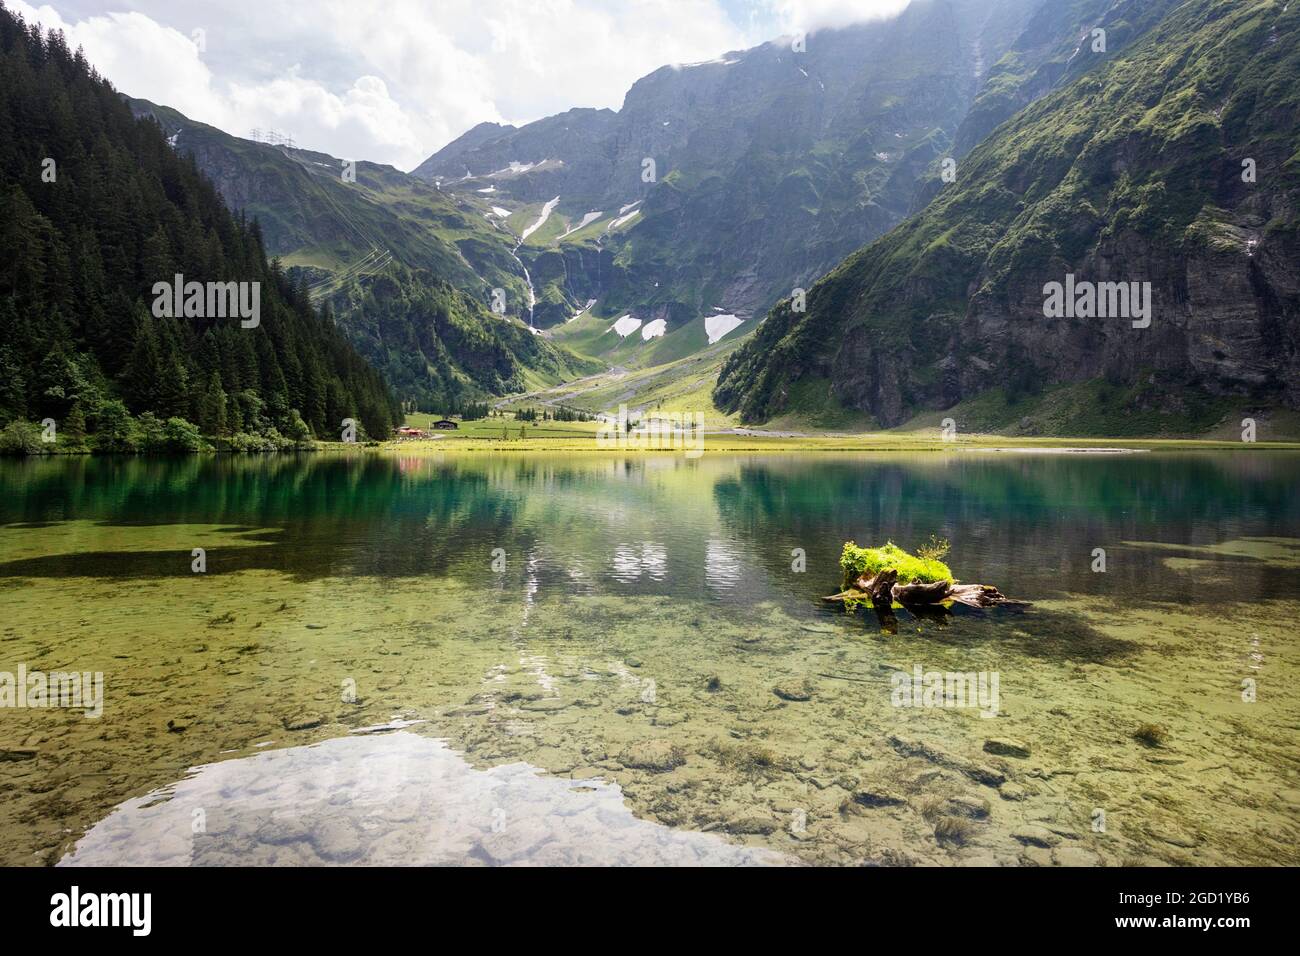 View on a mountain lake Hintersee im Felbertal in Hohe tauern national park in Mittersill, Tyrol, Austria Stock Photo